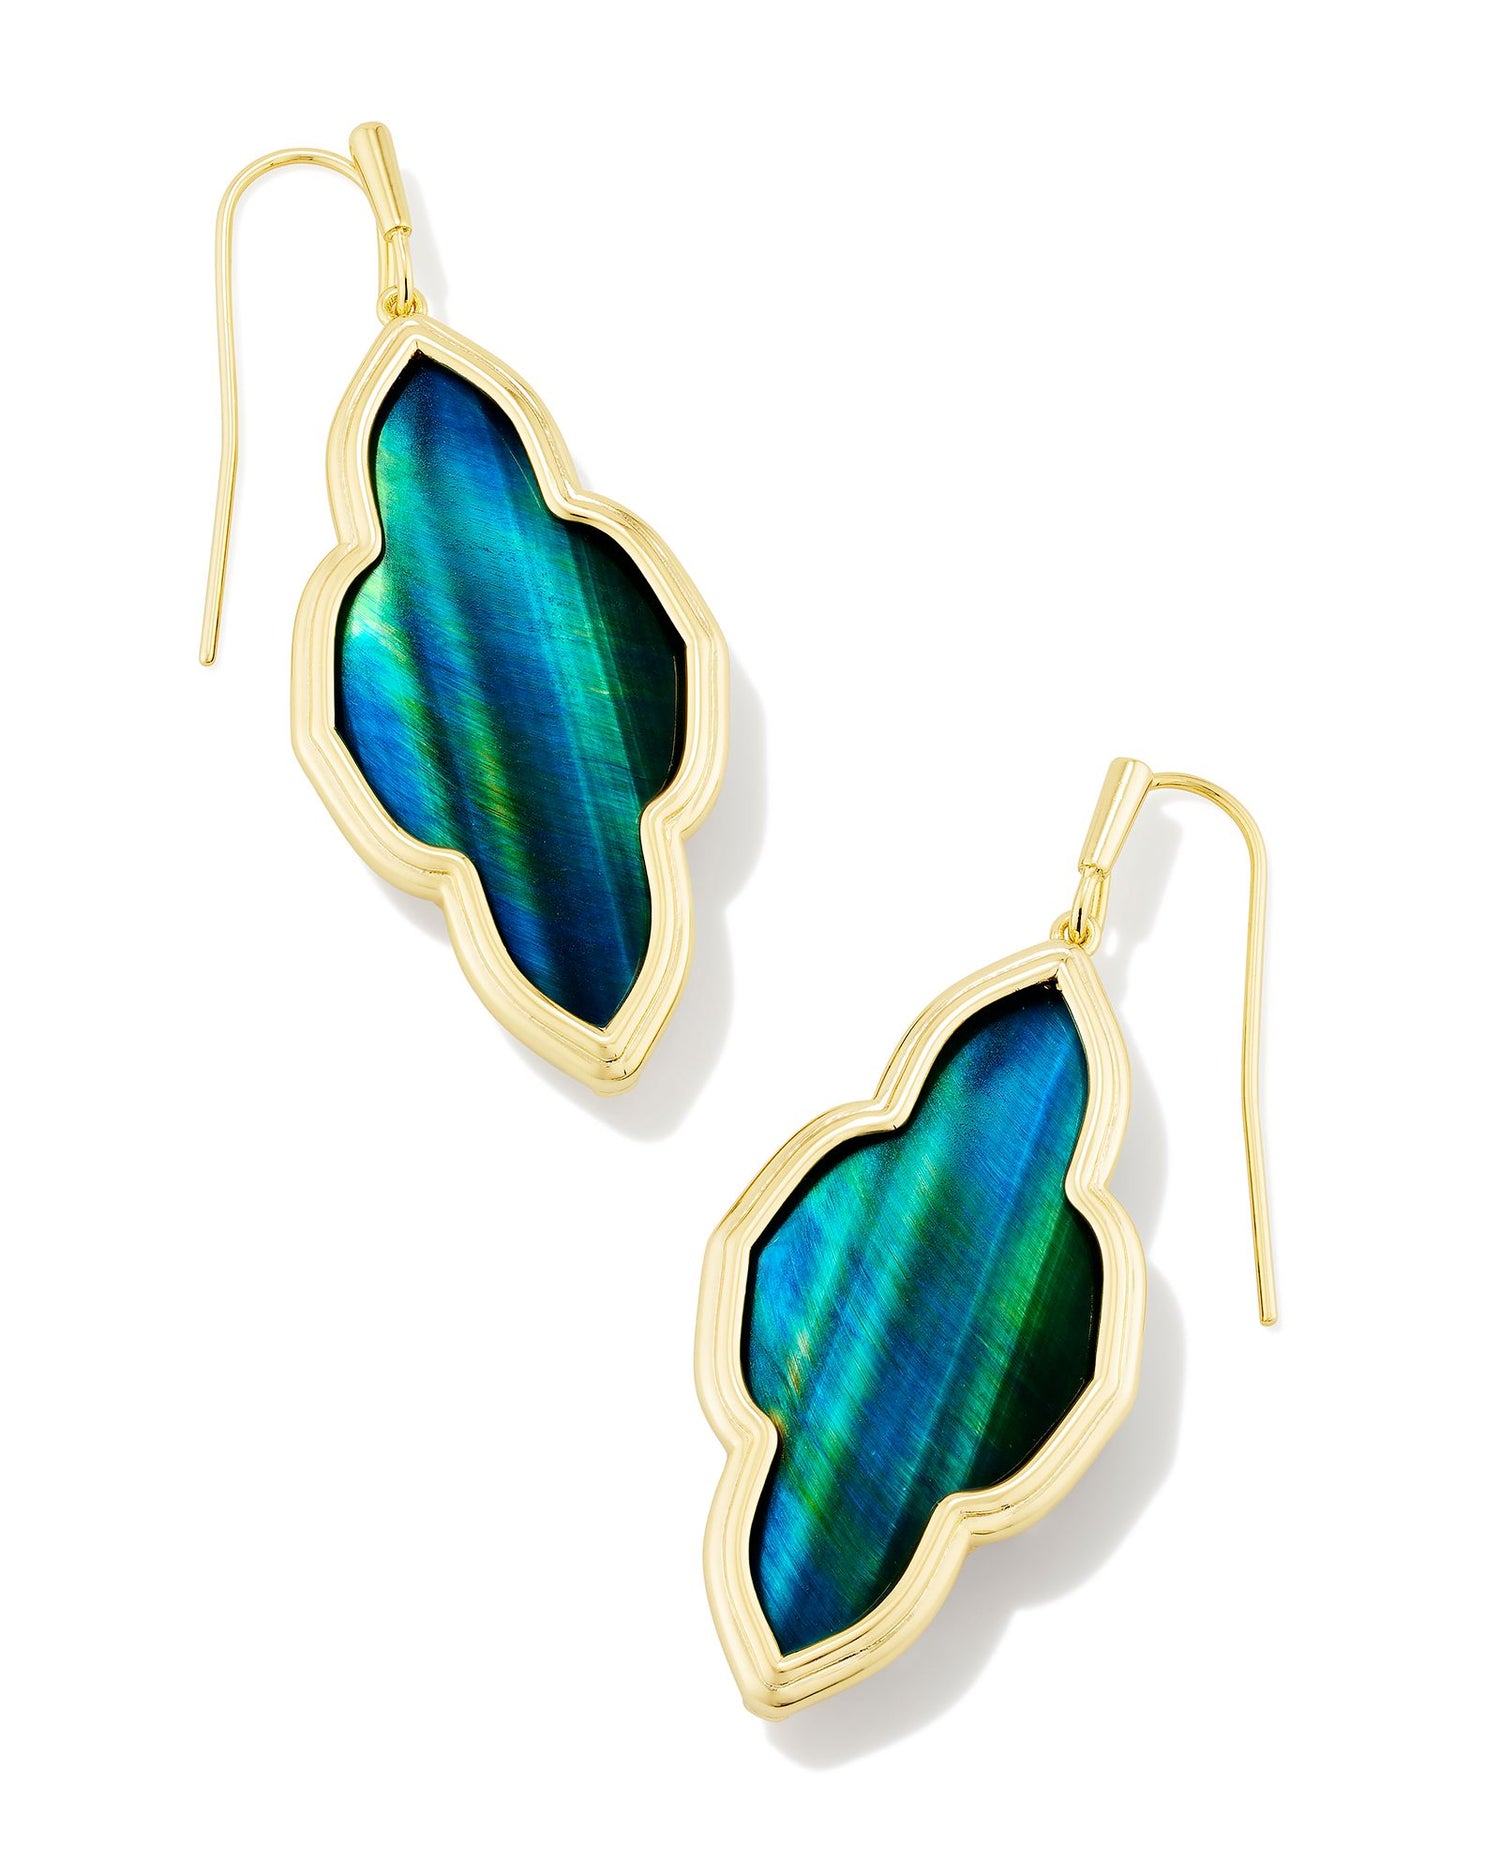 A celebration of our signature medallion logo, the Framed Abbie Gold Drop Earrings are a glam take on the everyday drop style. A gorgeous stone is paired with a sleek metal frame, creating earrings that complement any and every face shape. Teal Tiger's Eye